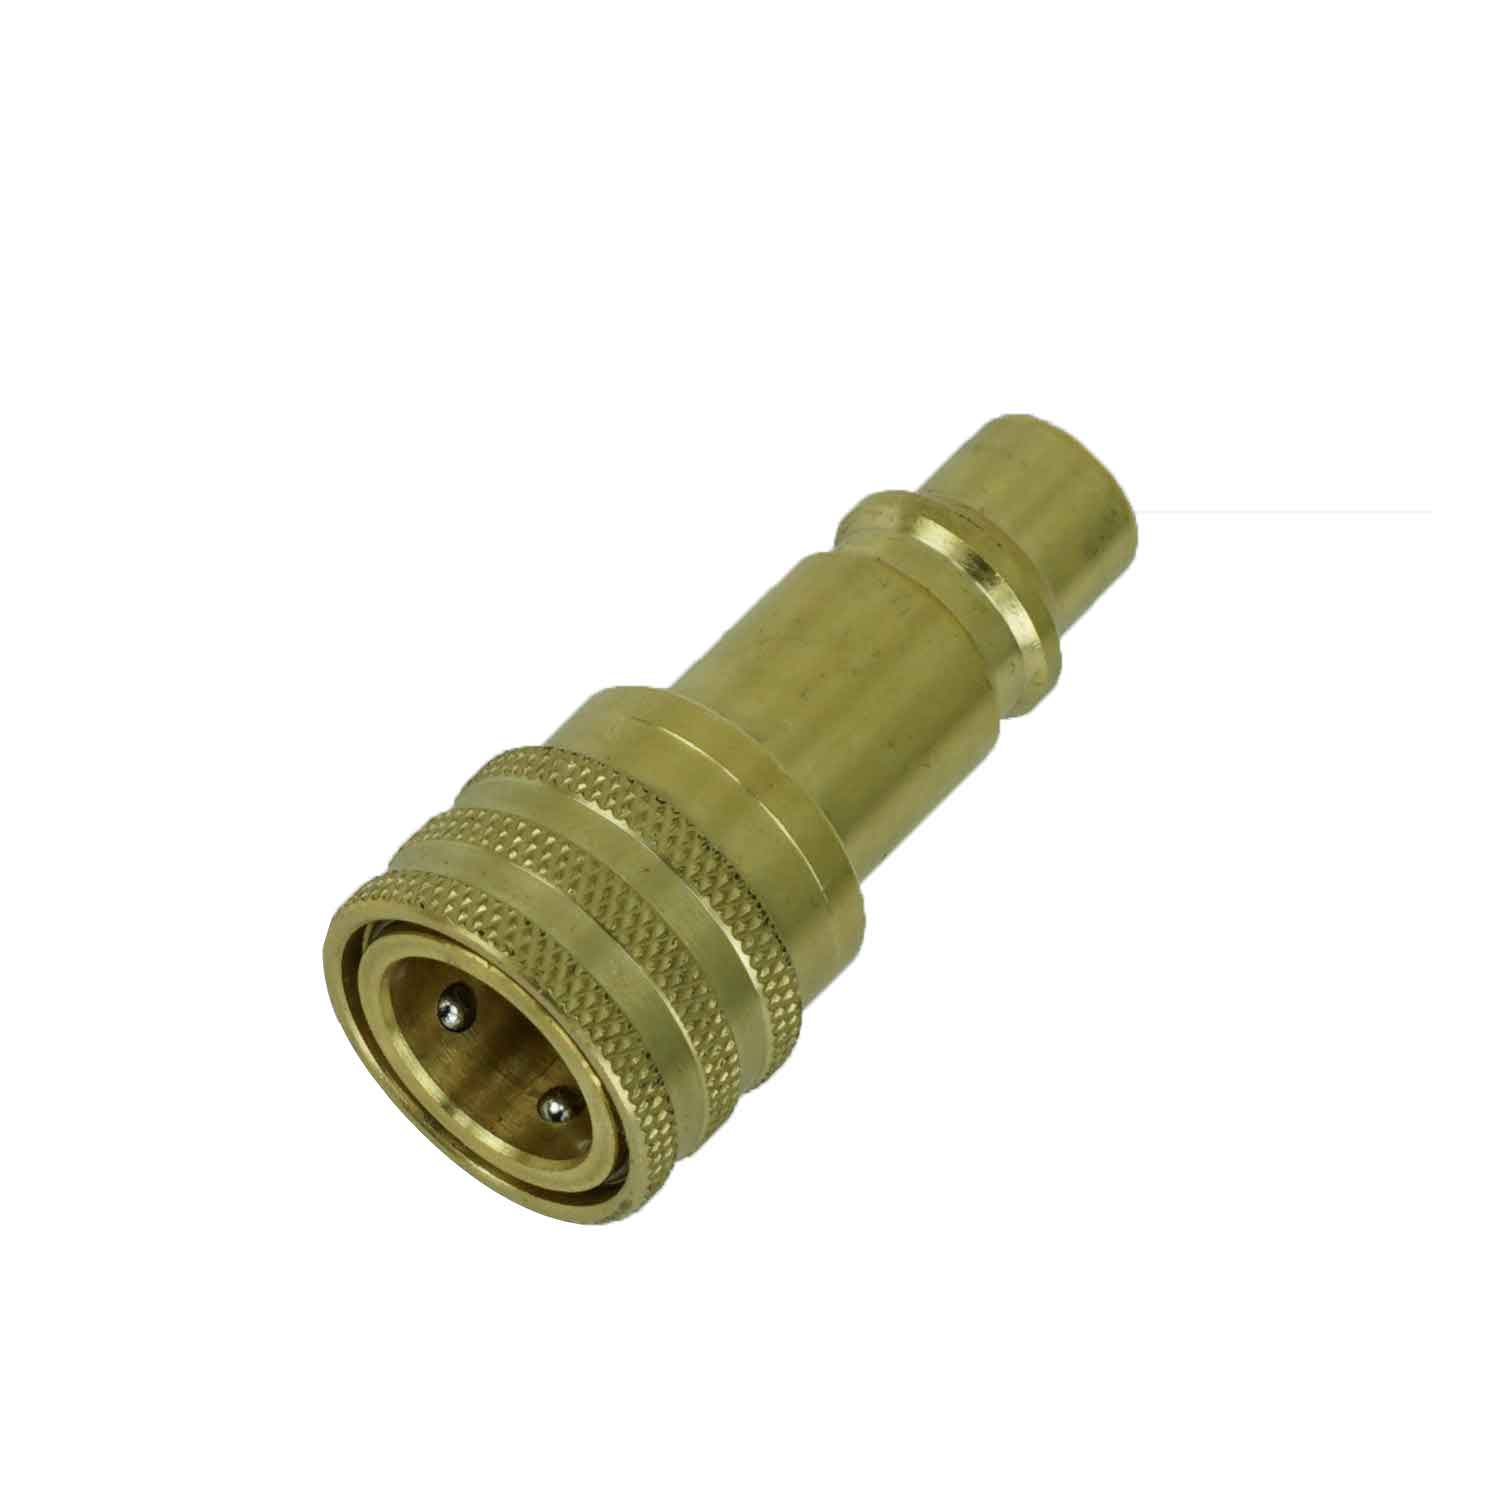 service port adapter r1234yf to r134a